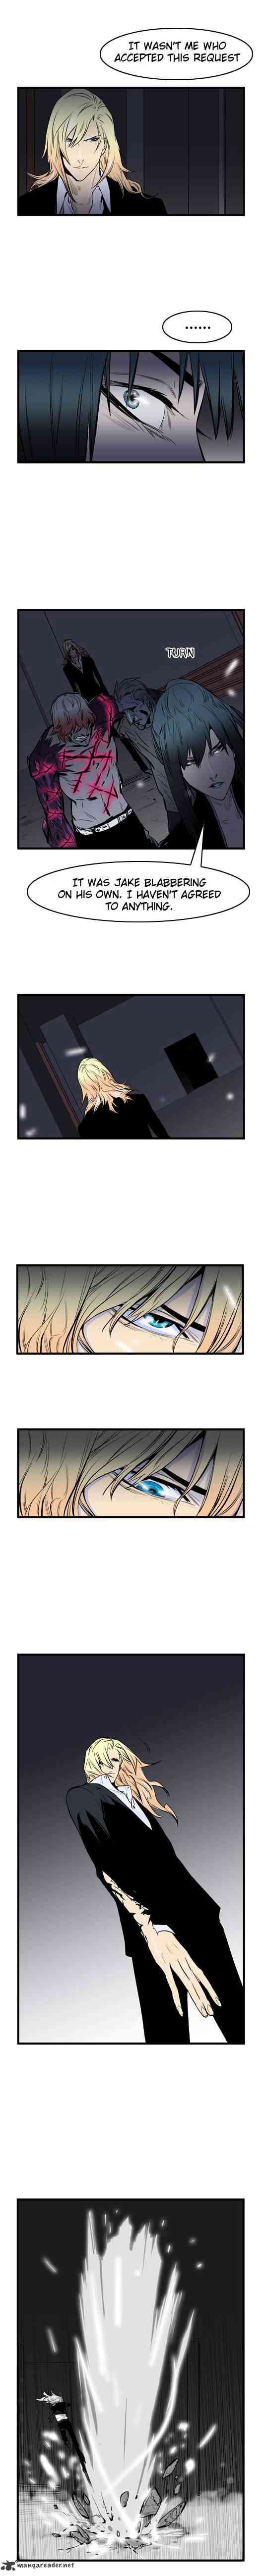 Noblesse Chapter 46 _ Chapters 46-60 page 14